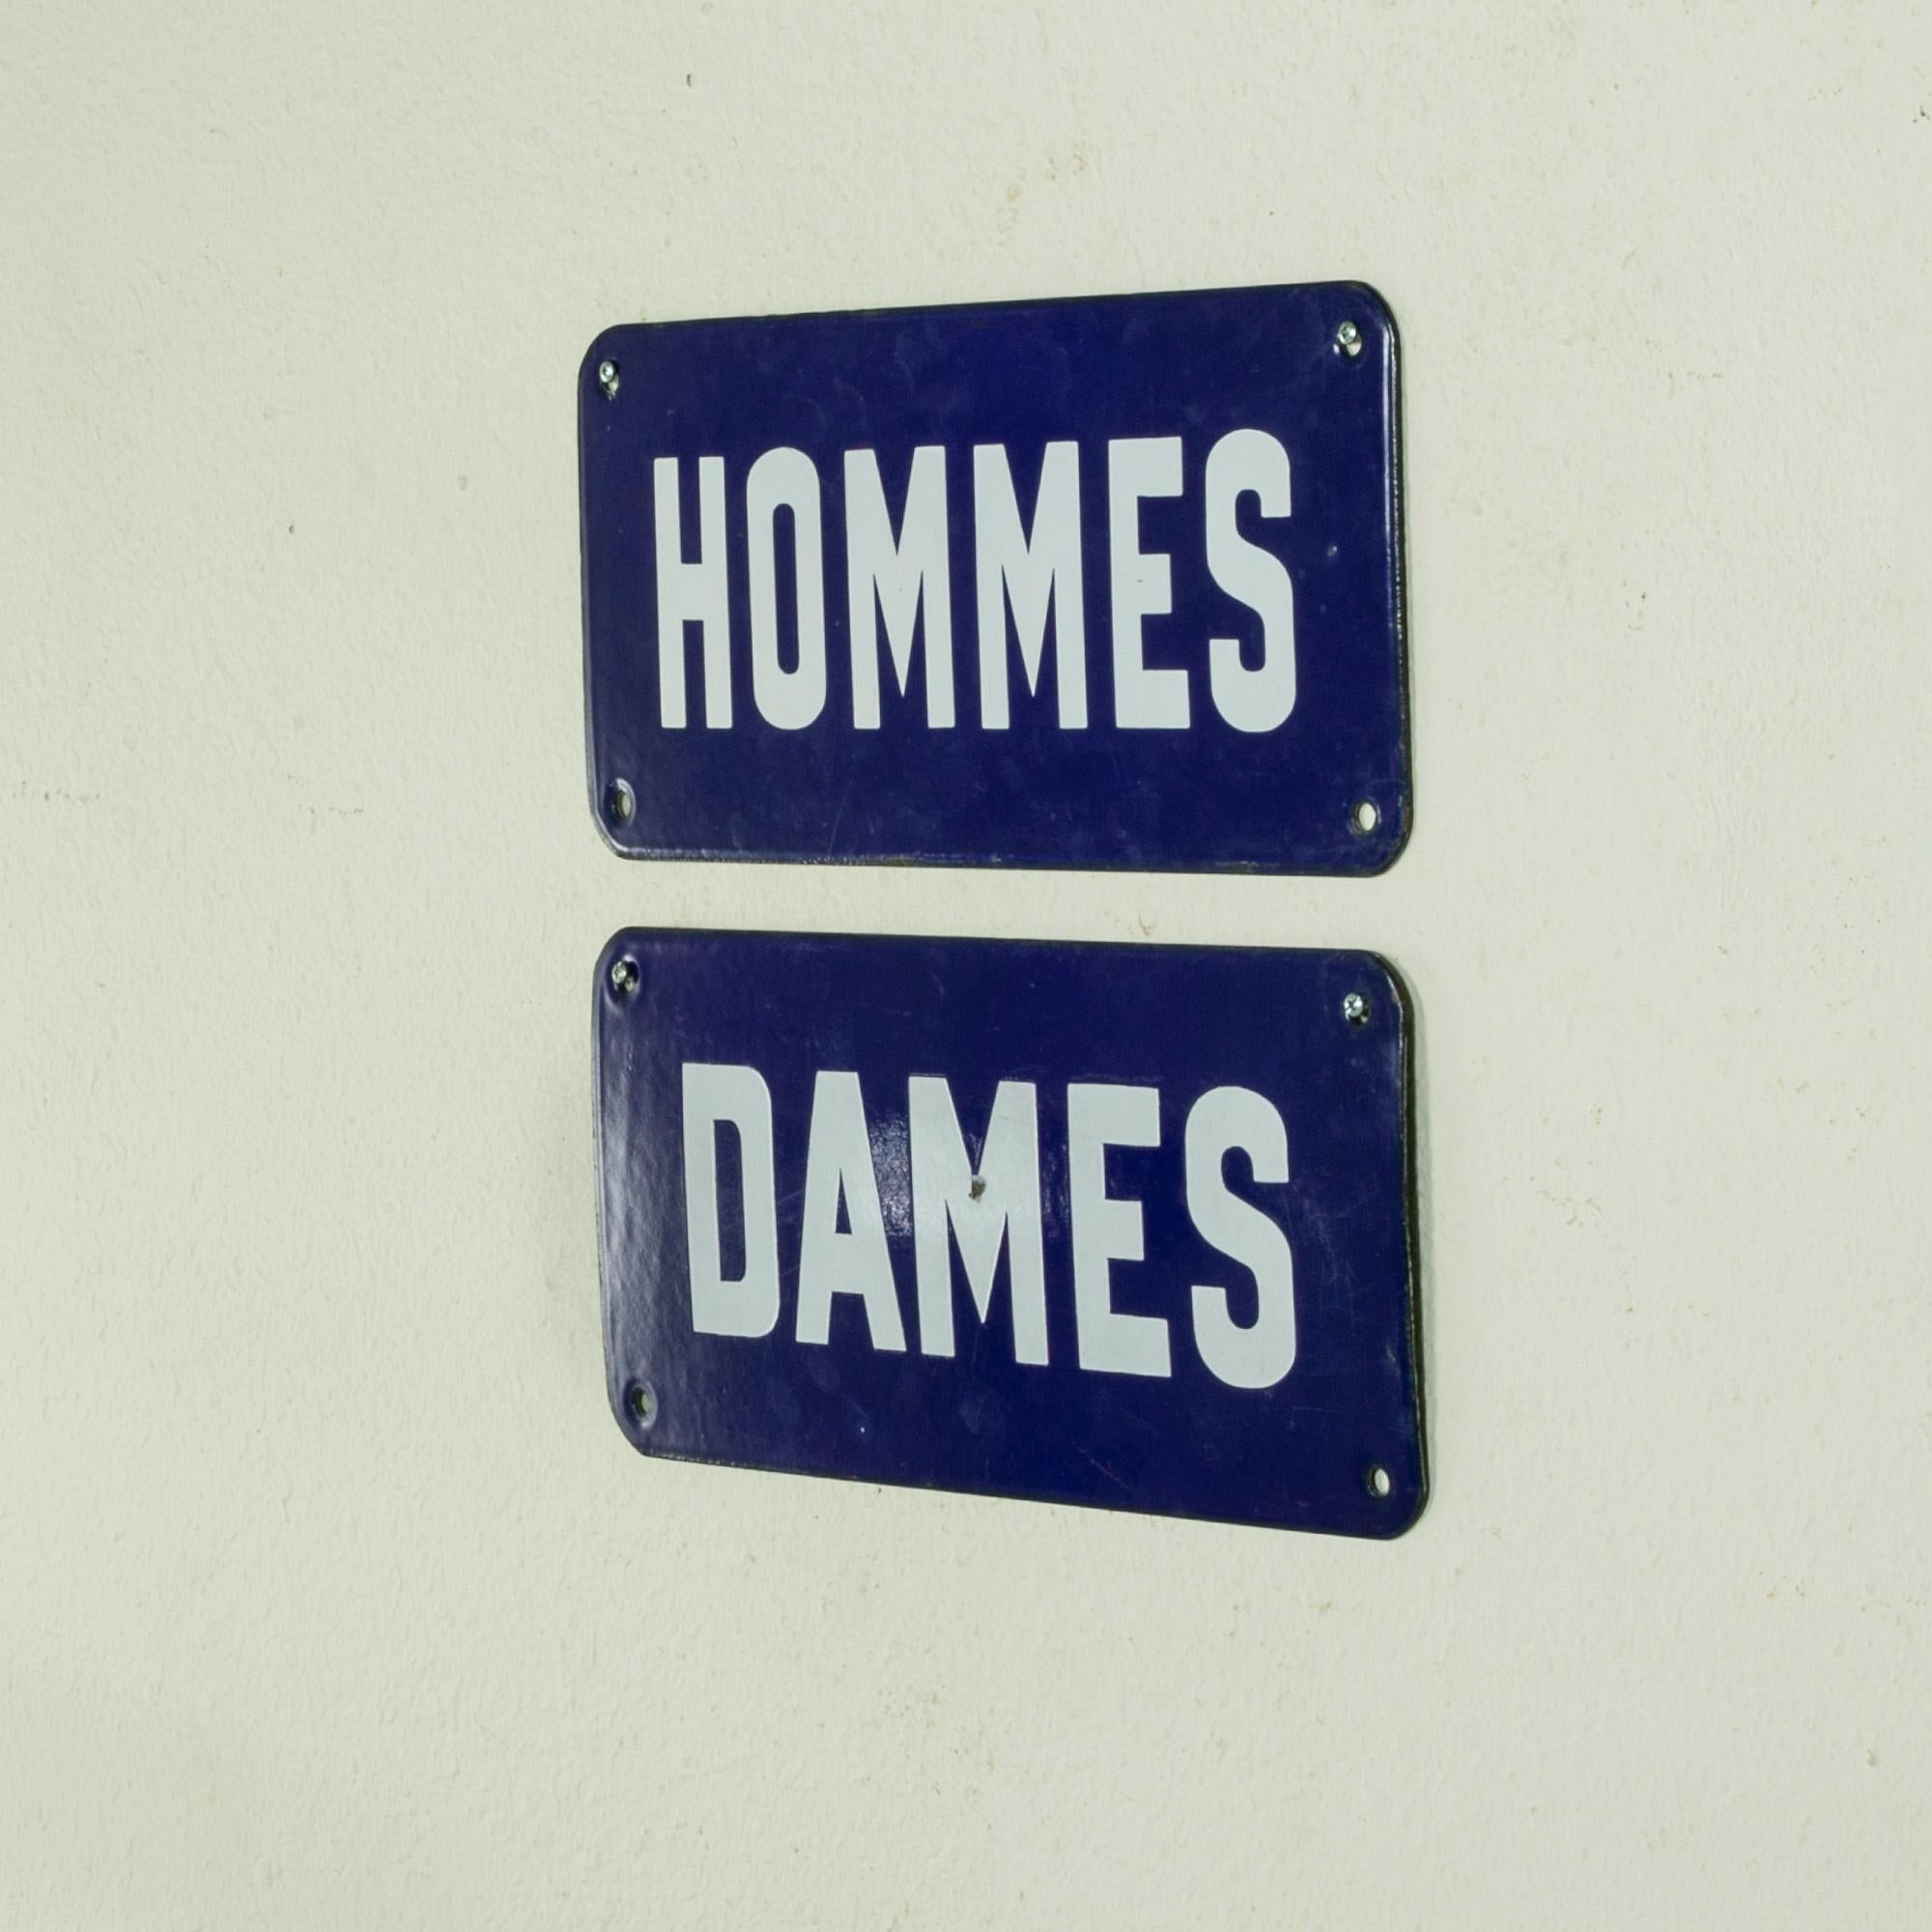 This pair of mid-twentieth century French enameled signs are marked Hommes and Dames which translates to Gentlemen and Ladies. In a charming blue and white, this pair would be ideal for a his and hers bathroom. c. 1950.